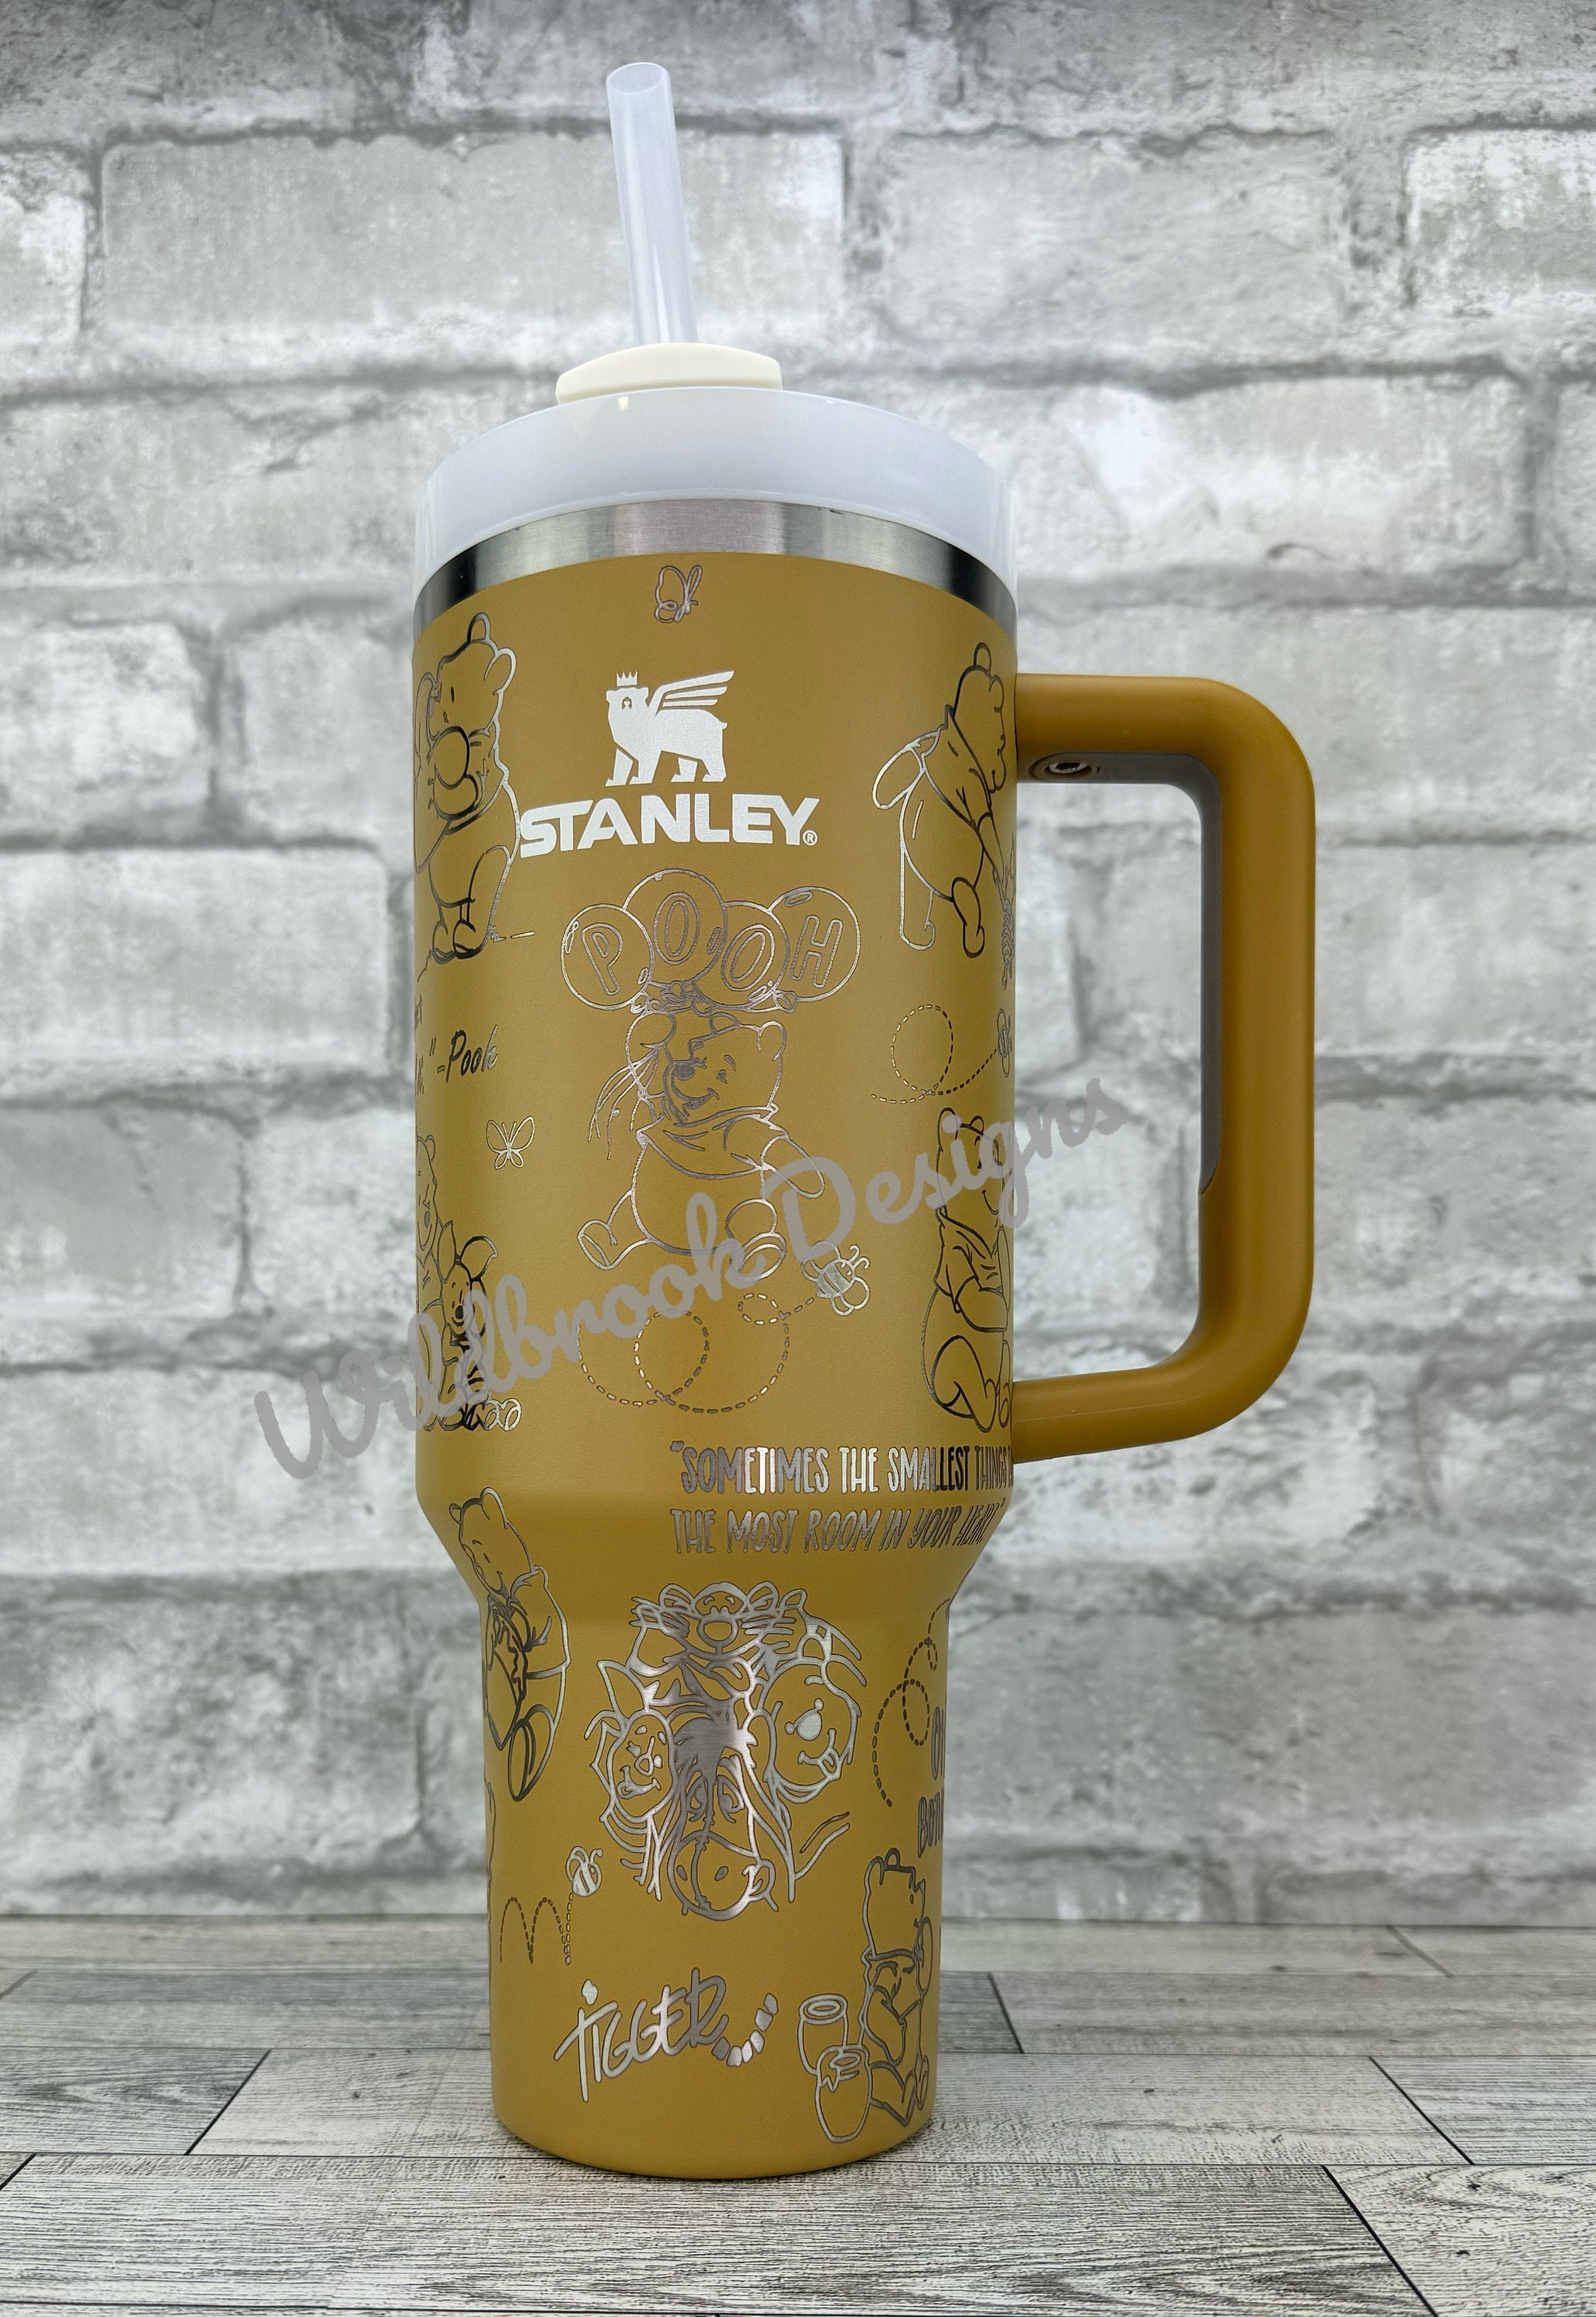 Bear and Friends Stanley Adventure Quencher 40oz tumbler